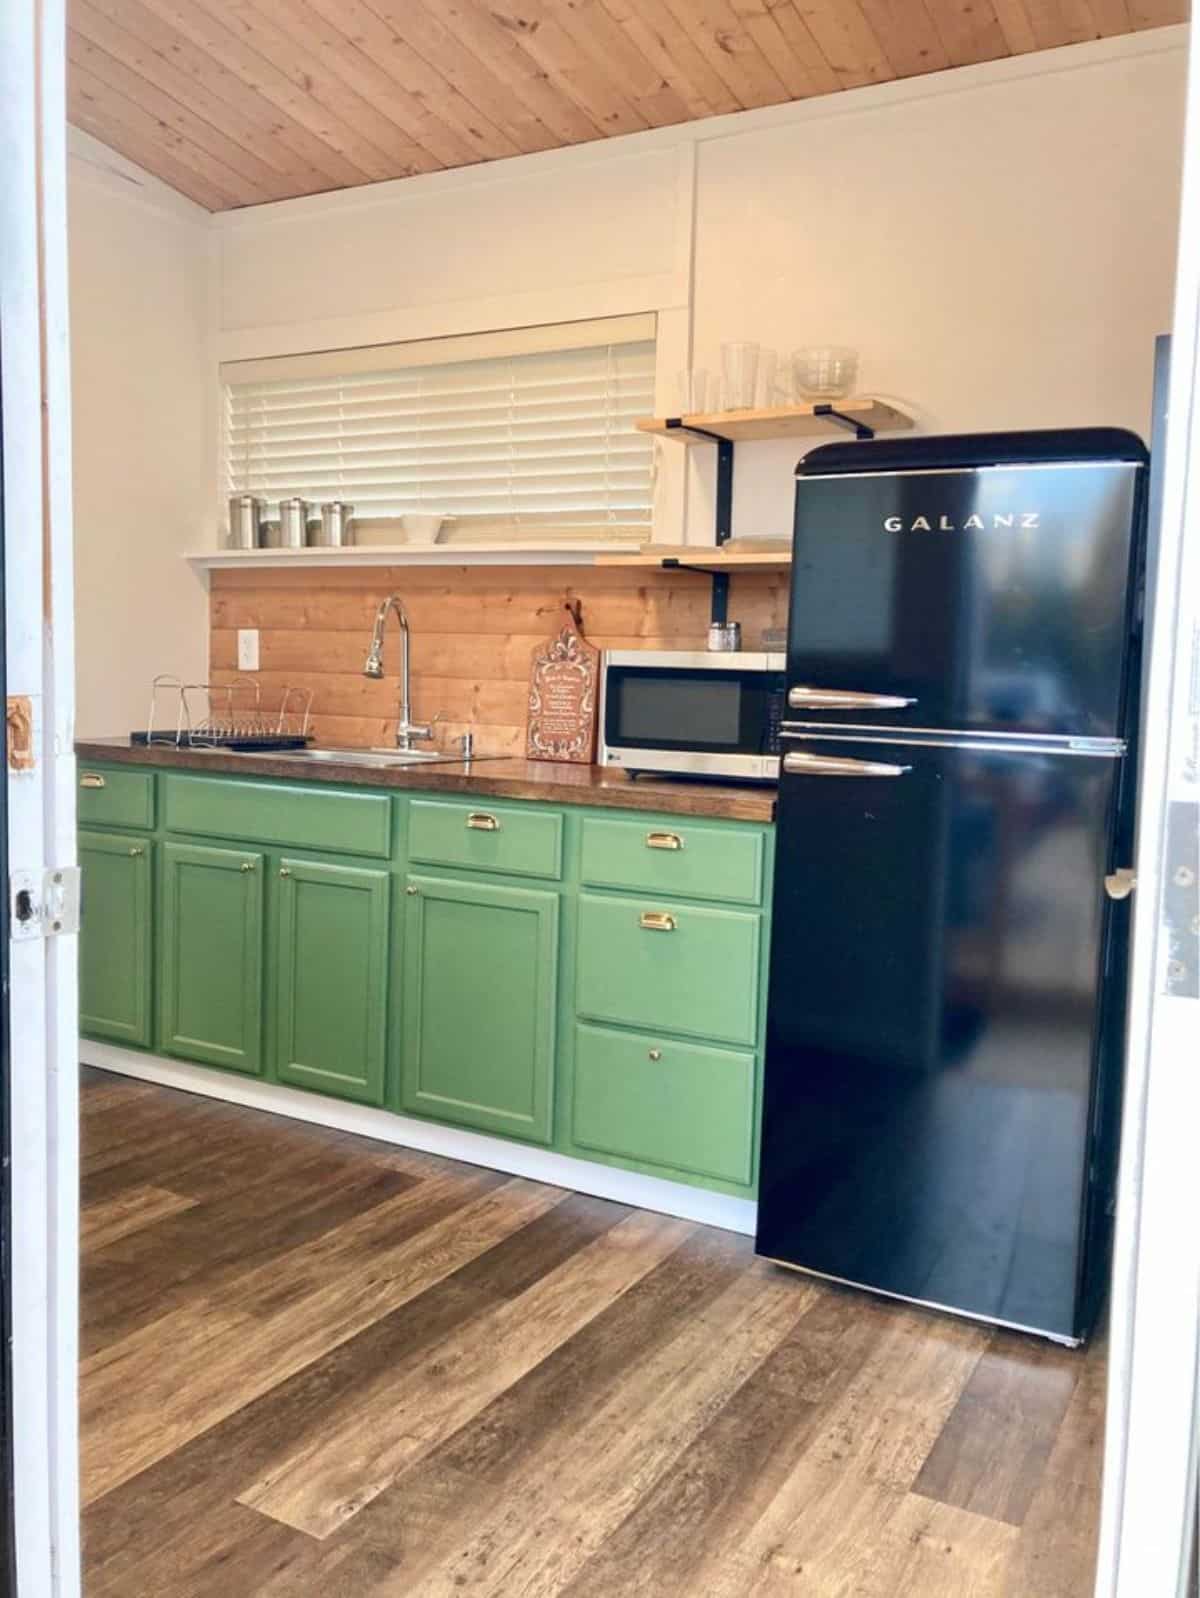 Kitchen area of 25' Beautiful Tiny Home  has refrigerator, microwave oven, counter top, sink and storages